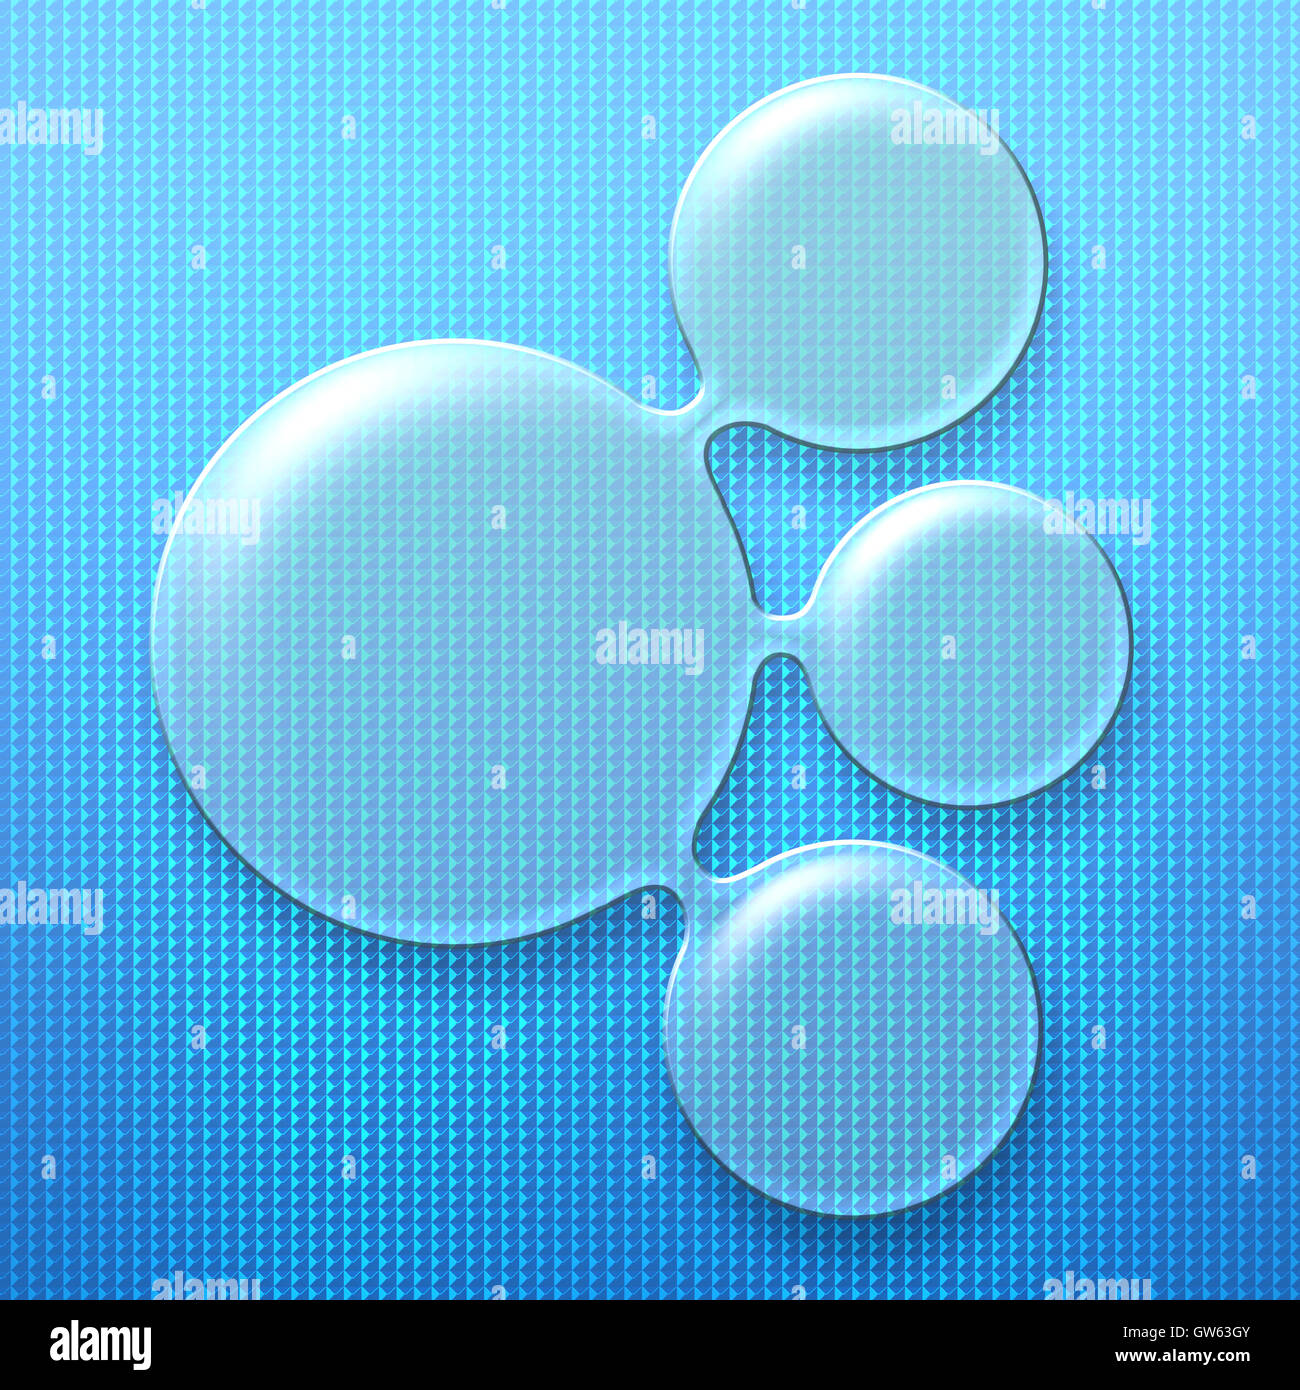 set 8. circle glossy glass on blue mesh metal wall. 3d illustration background. Stock Photo